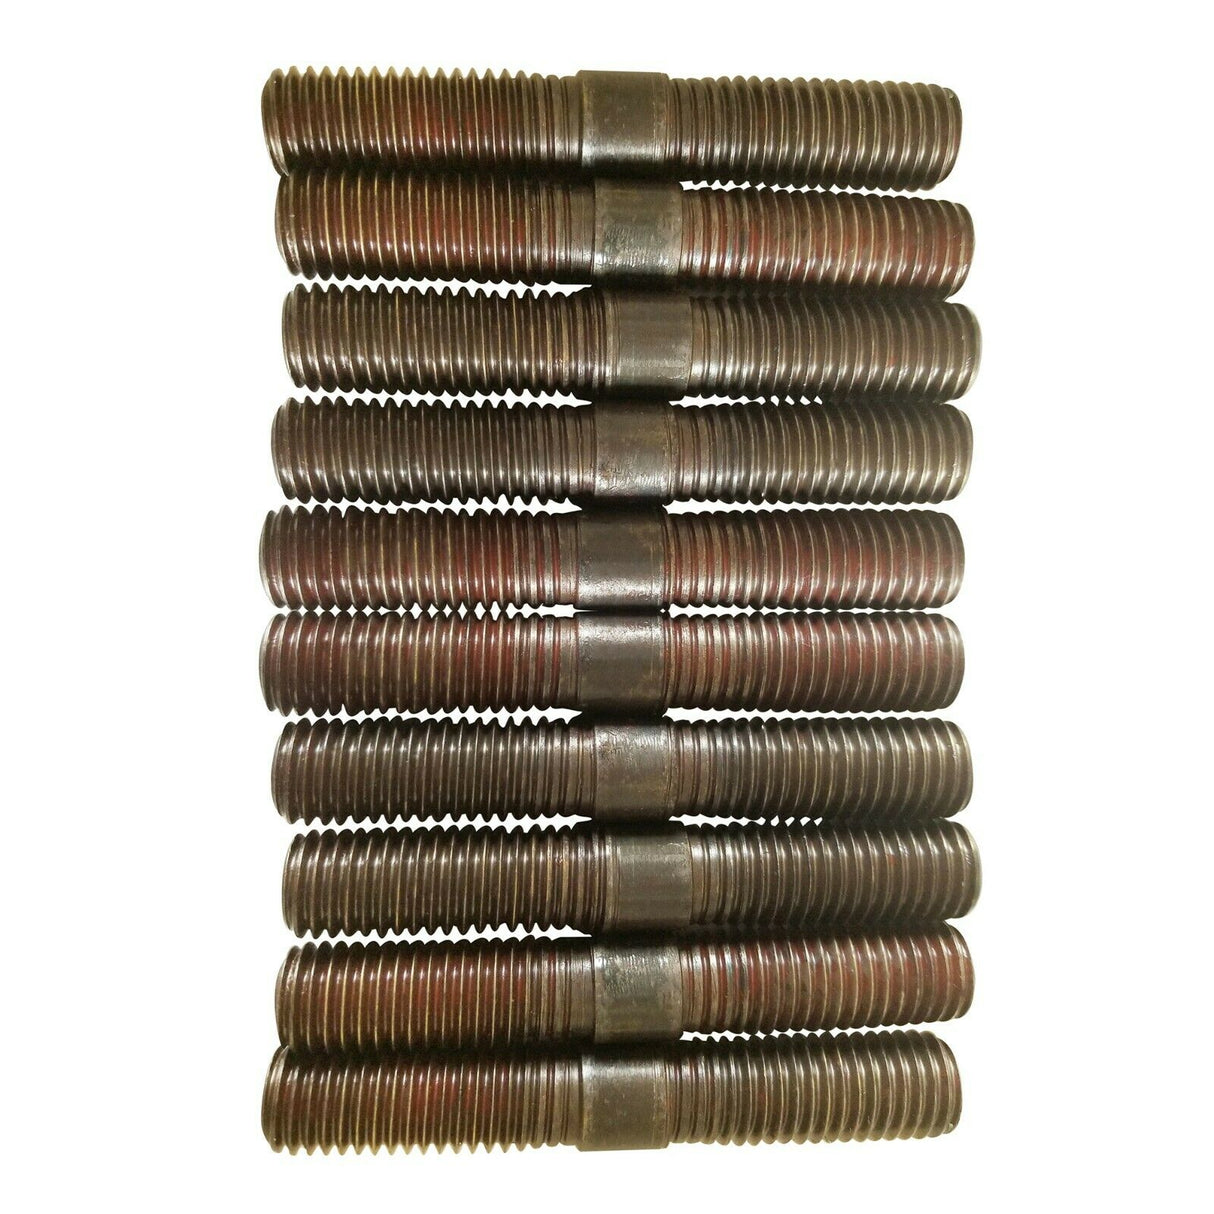 TURNER 5/8-11 X 4" ROLLED THREAD CLAMPING STUDS - PACK OF 10